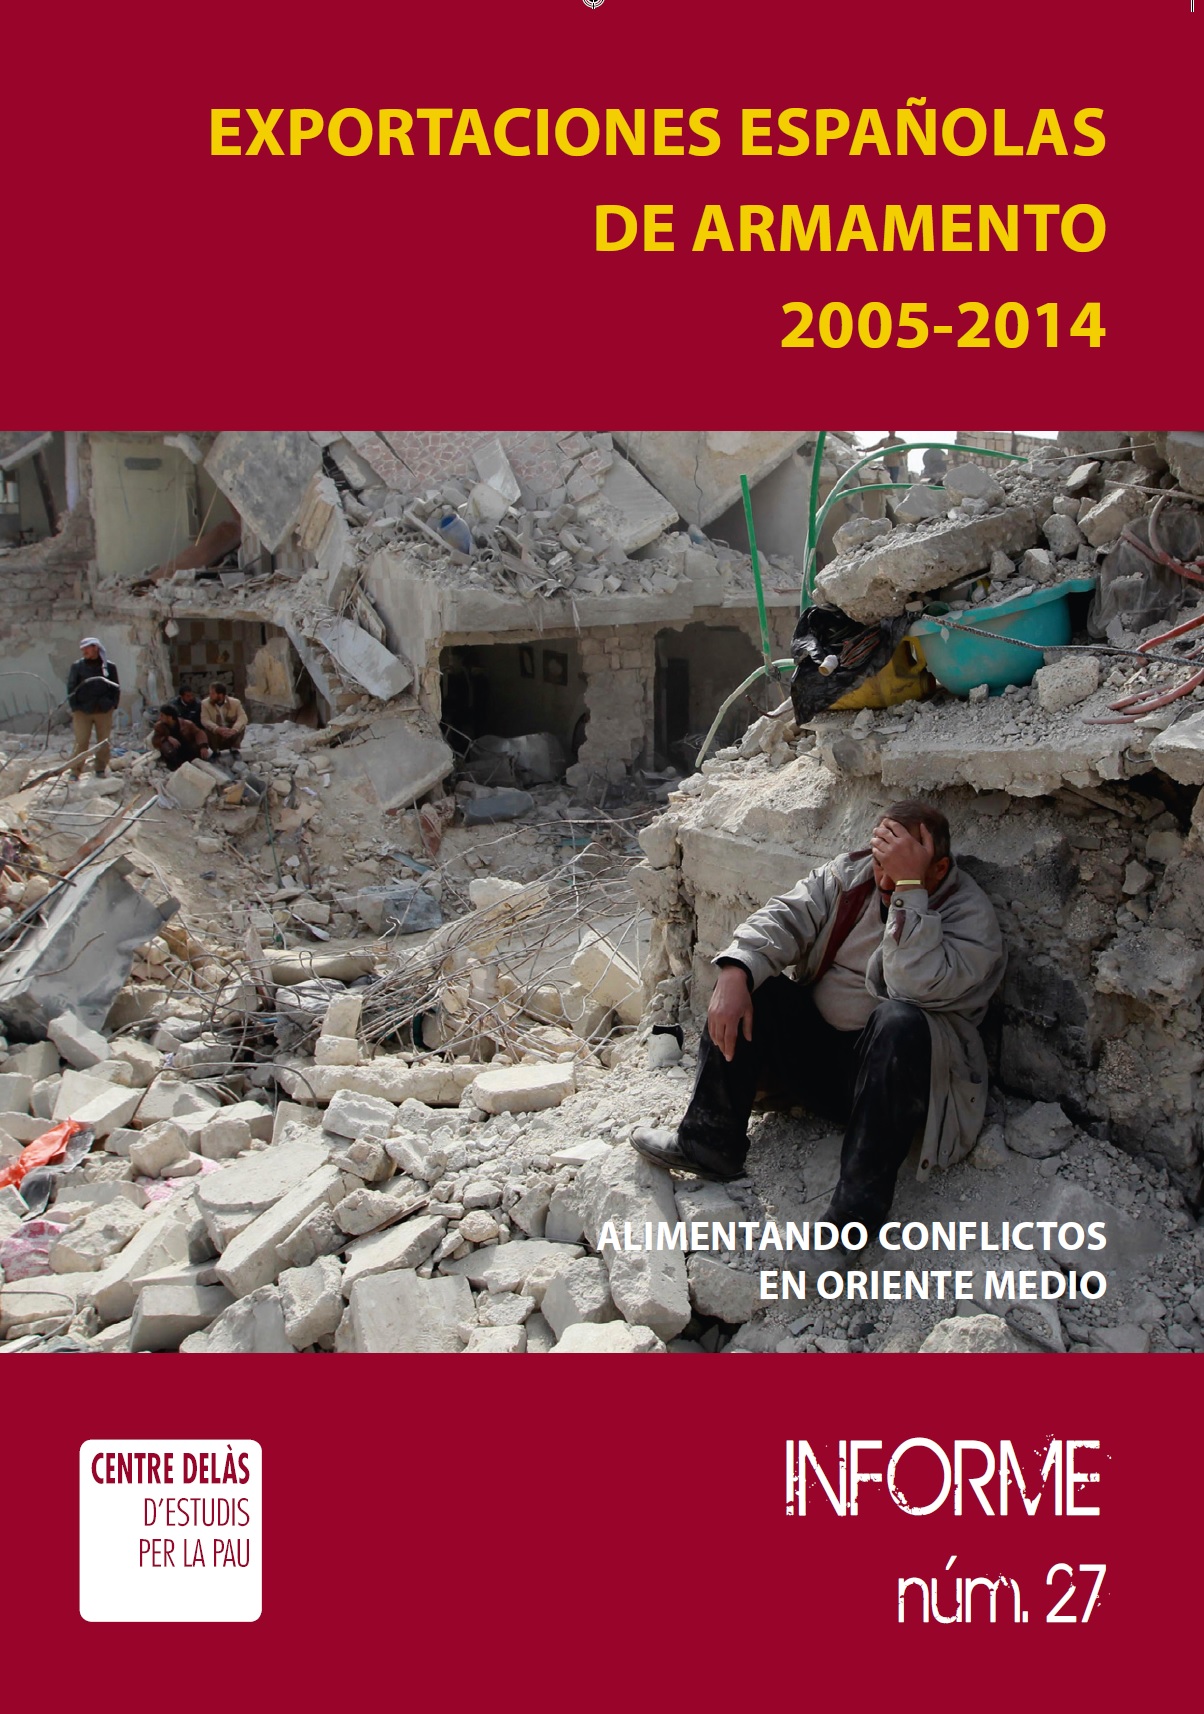 Report 27: Spanish arms exports 2005-2014. Fueling conflicts in the Middle East